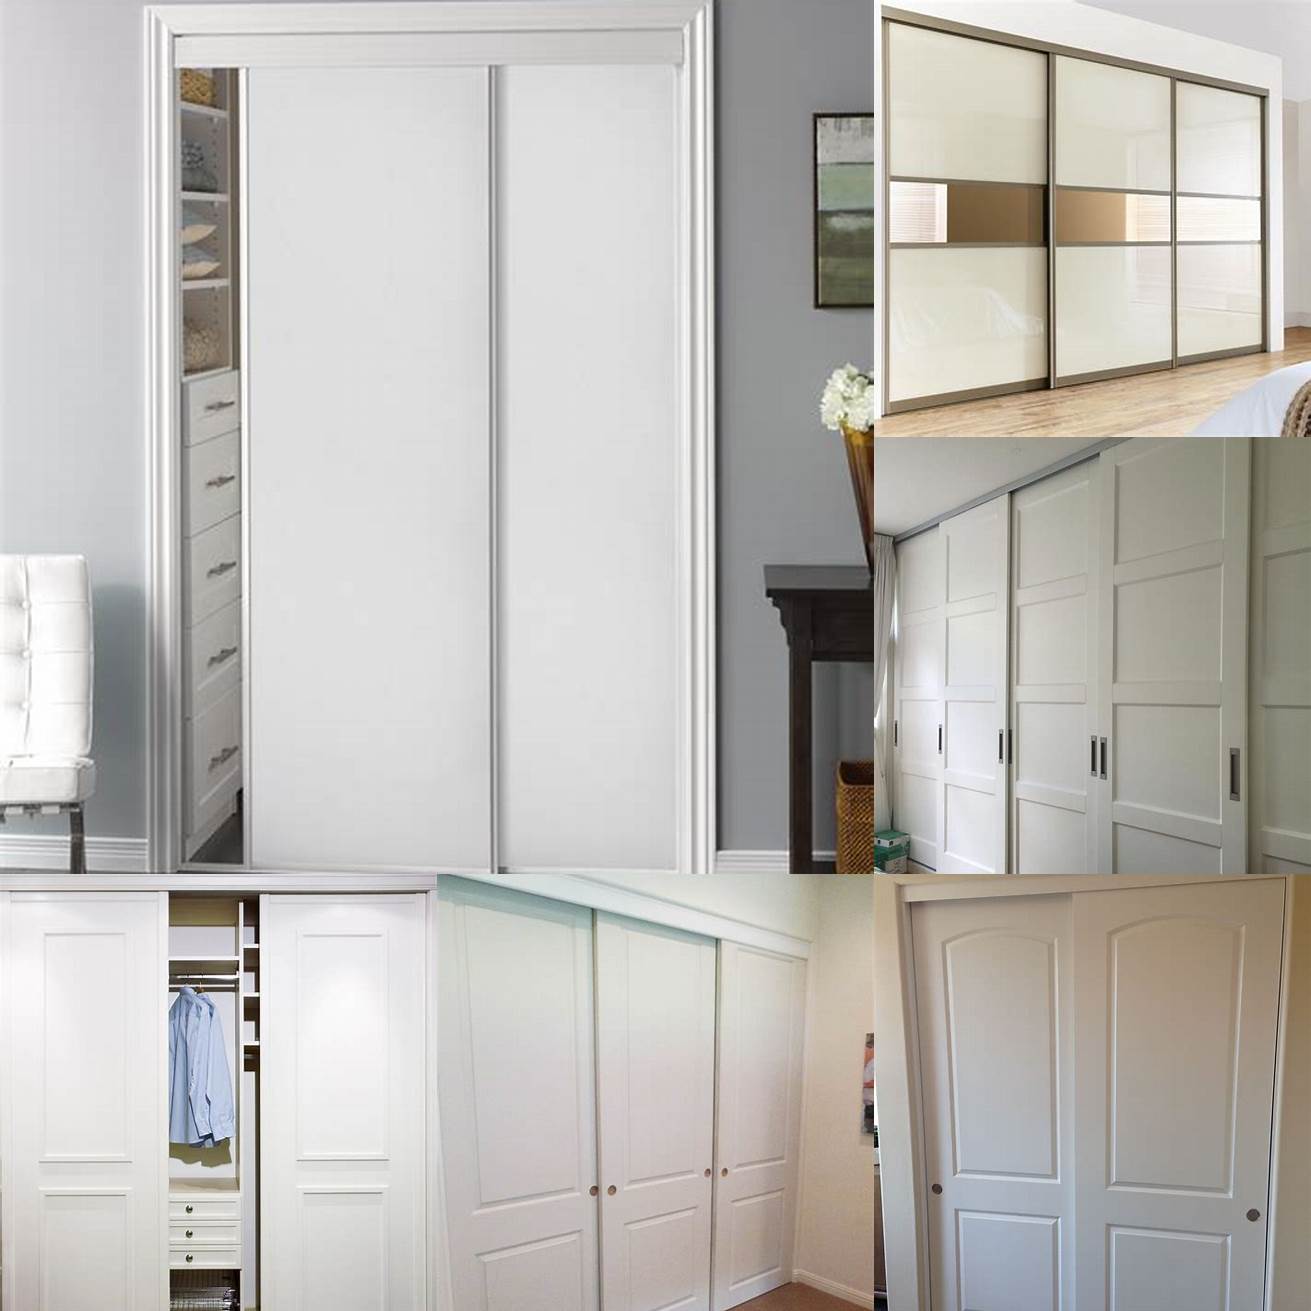 Image of a built-in closet with sliding doors